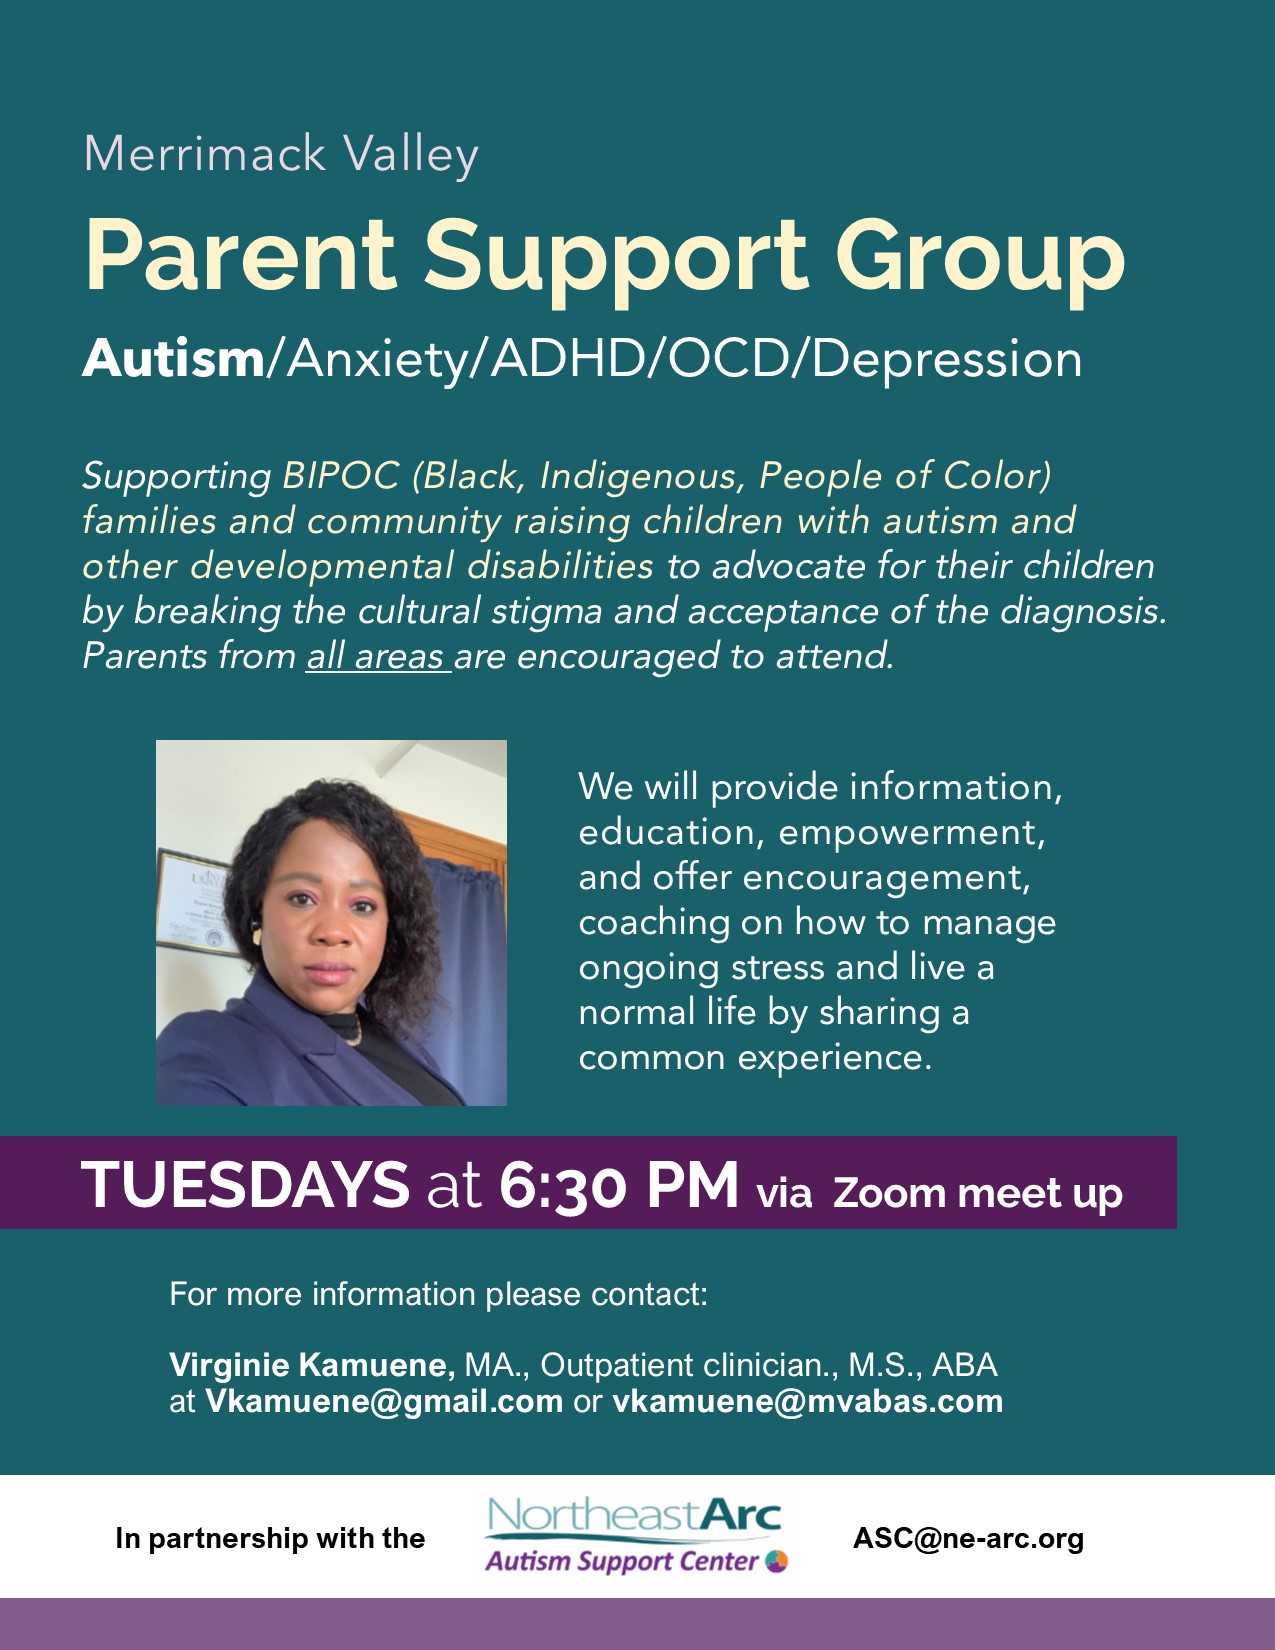 Flyer for BIPOC Autism Parent Support Group - Supporting Black, Indigenous, People of Color families and community raising children with autism and other developmental disabilities. Tuesdays at 6:30PM via zoom. Contact Virginie at vkamuene@mvavas.com for more information.